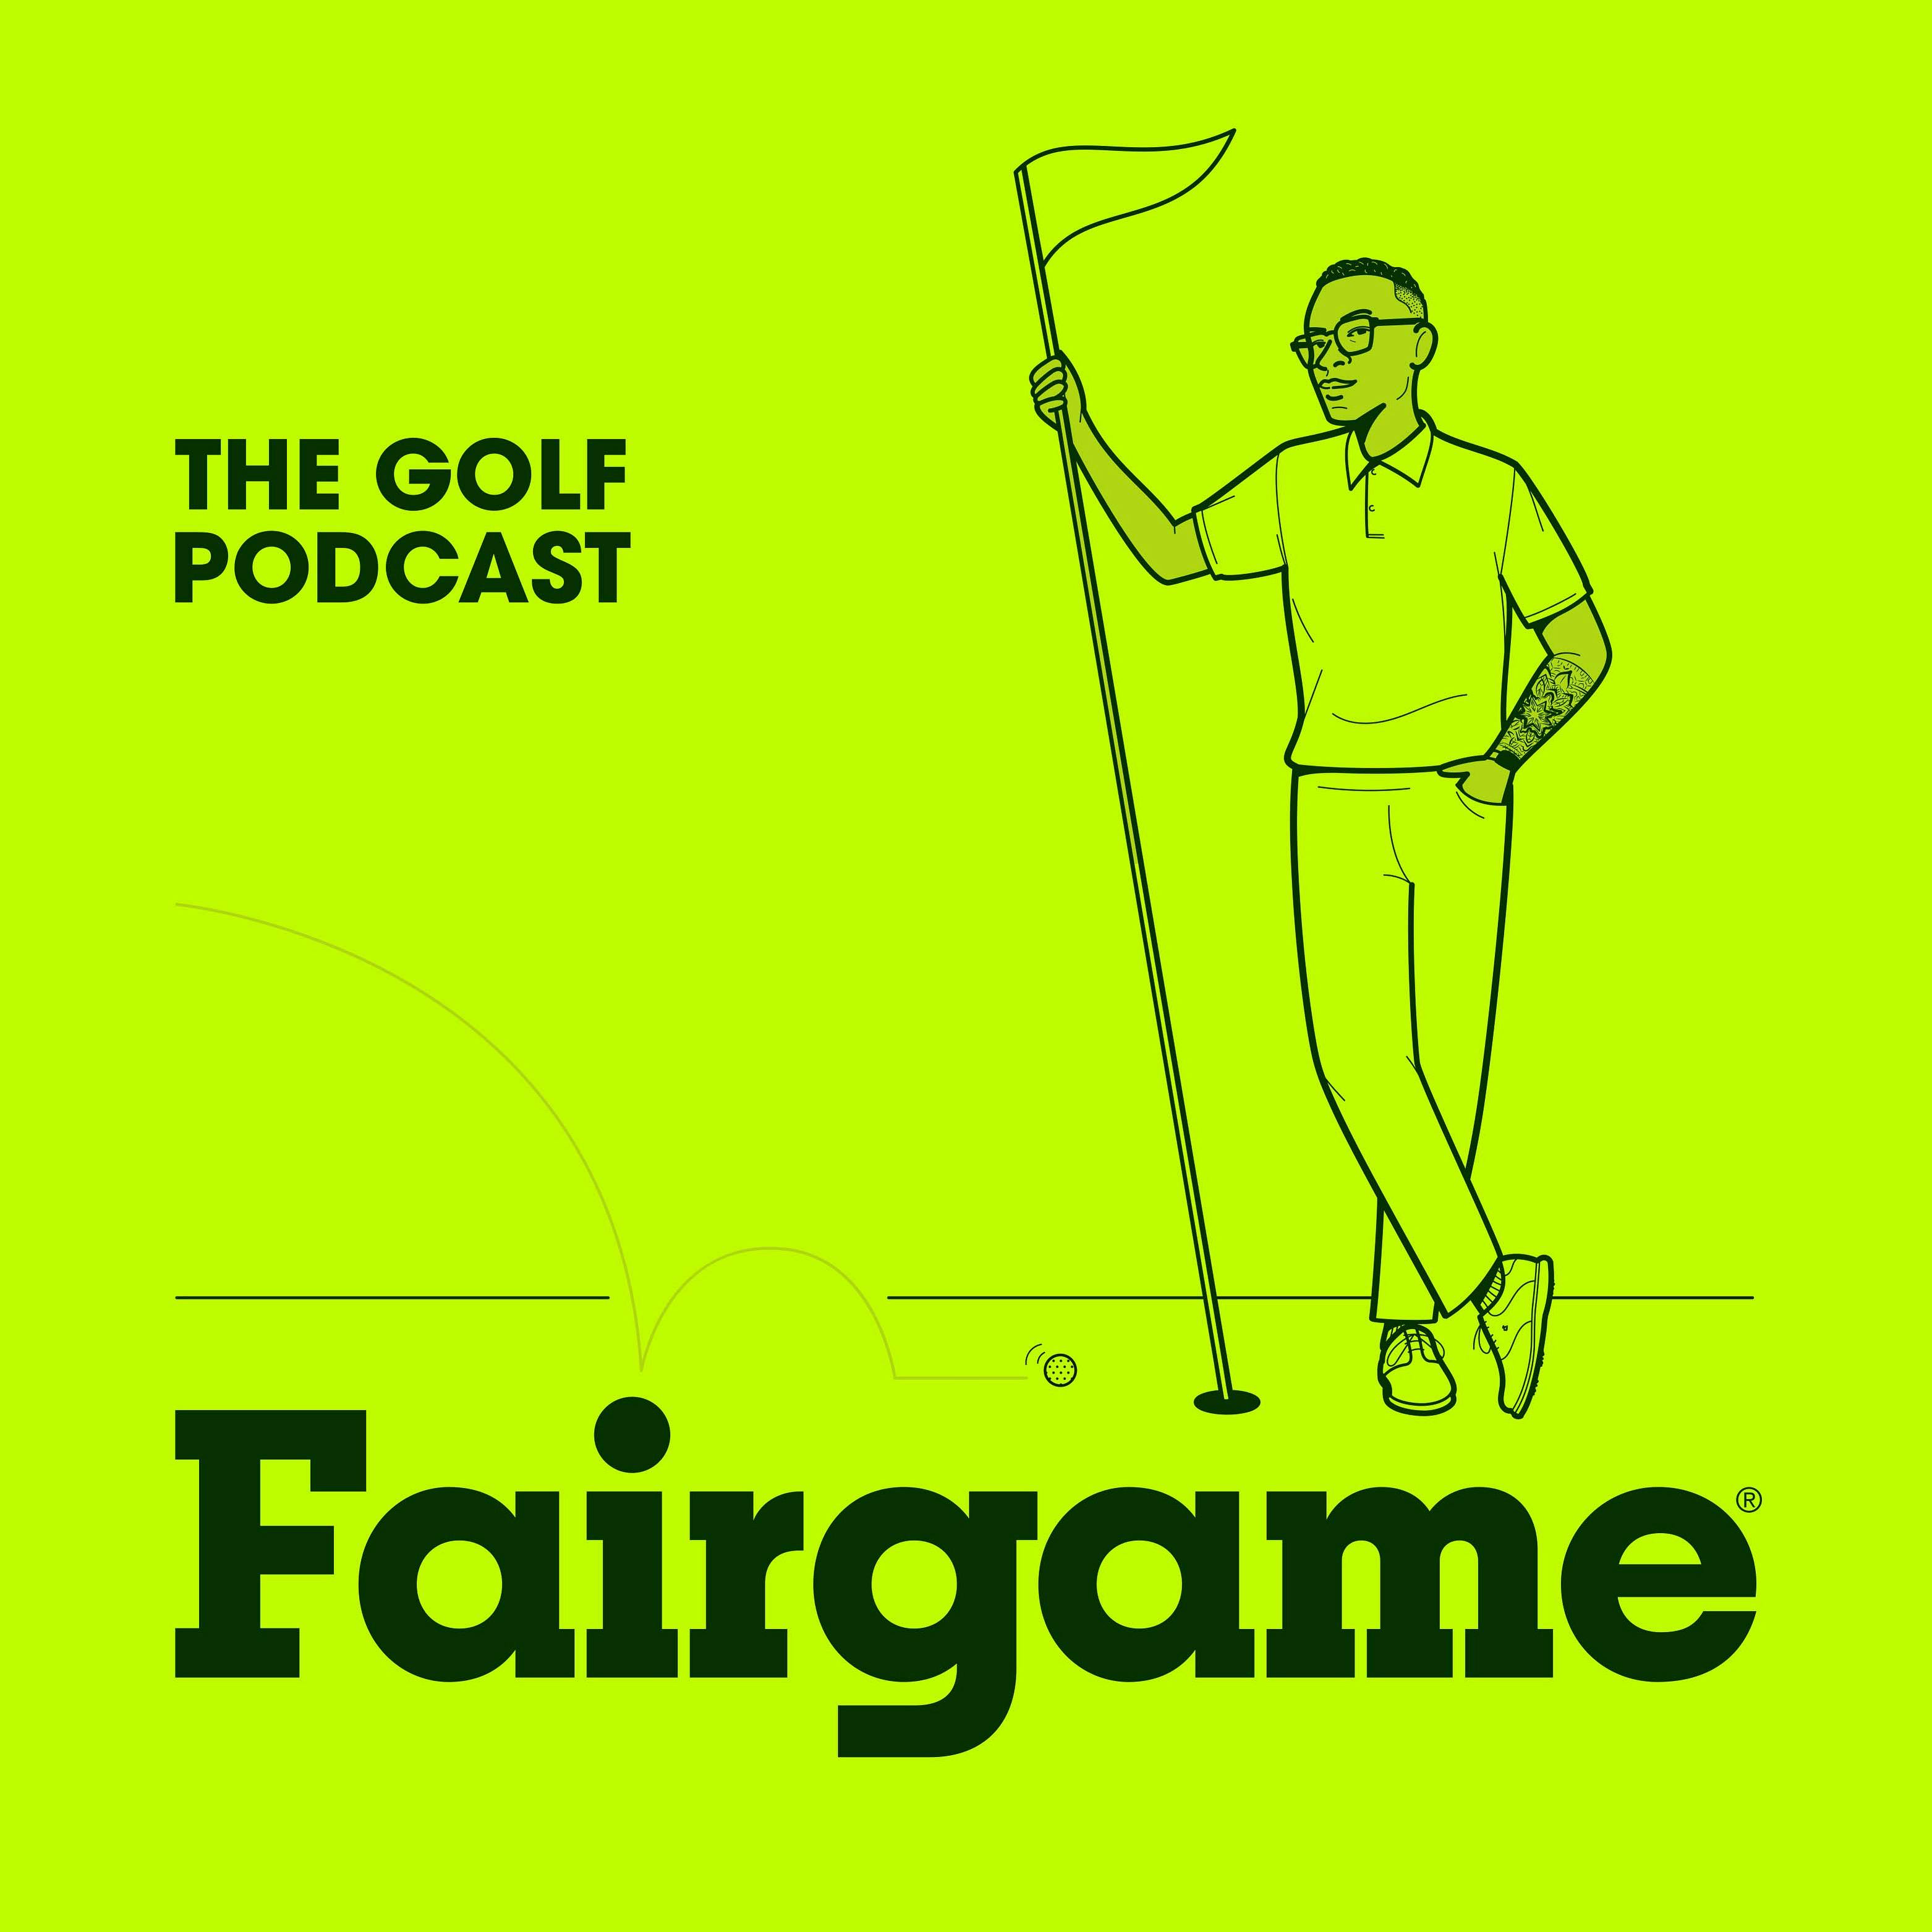 Episode 12: The Creative Side of Golf with Christian Hafer & Cole Young